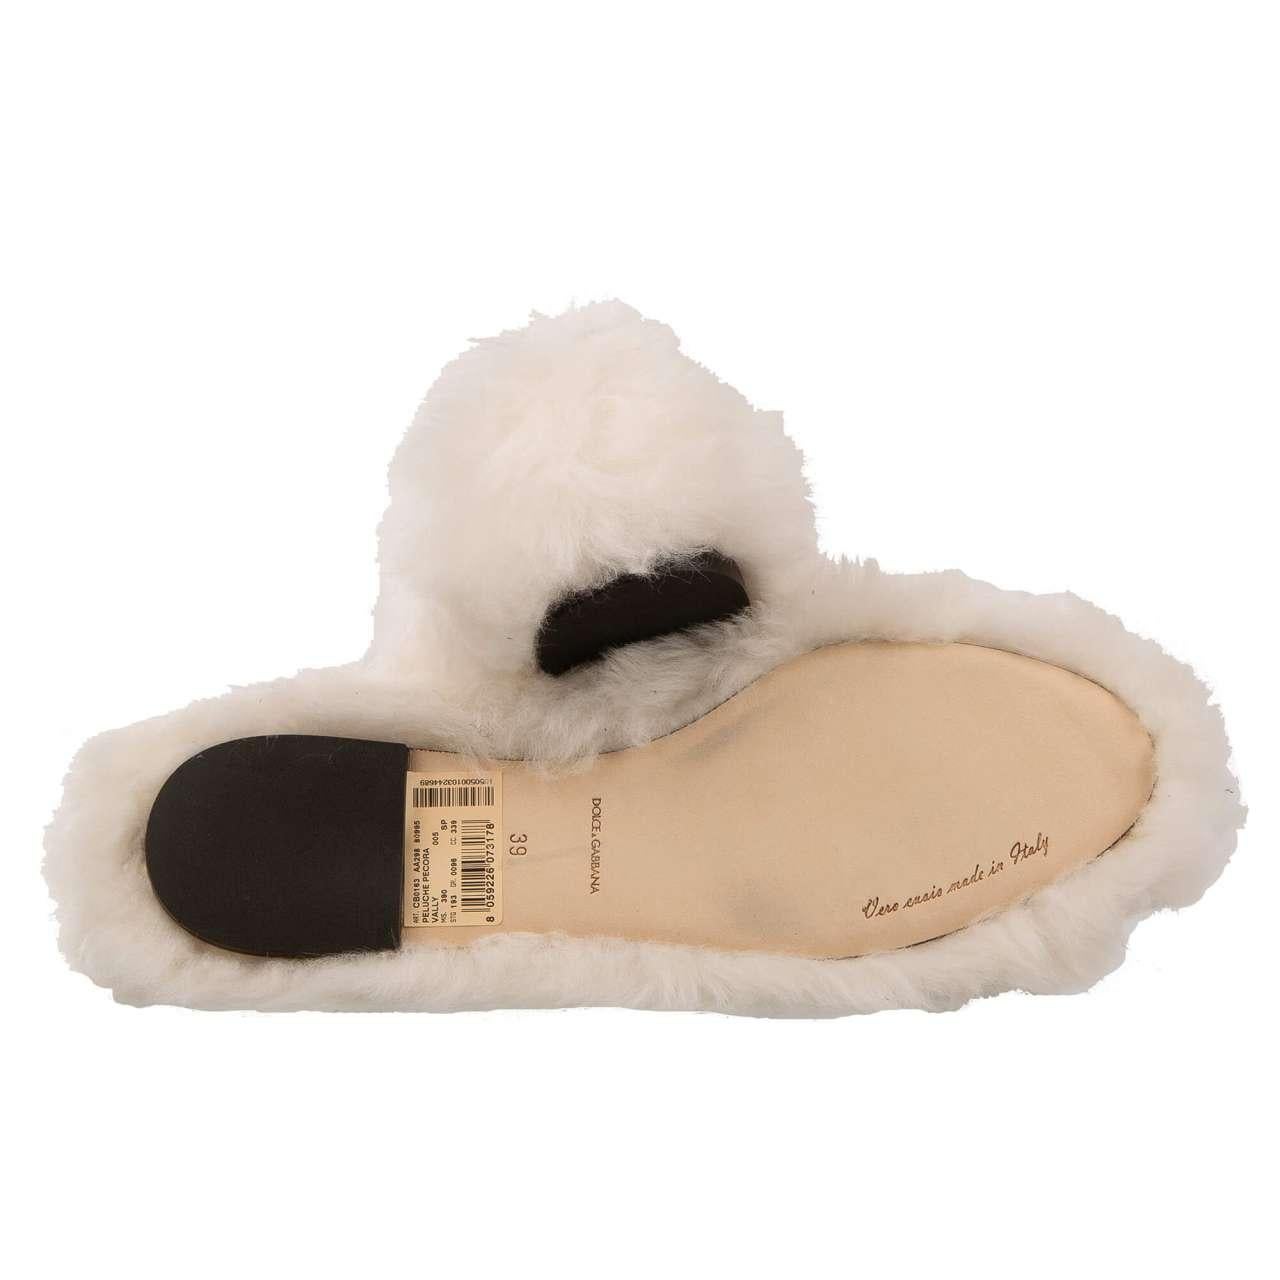 Dolce & Gabbana - Sheep Toy Eco Faux Fur Ballet Flats VALLY White 39.9 For Sale 1